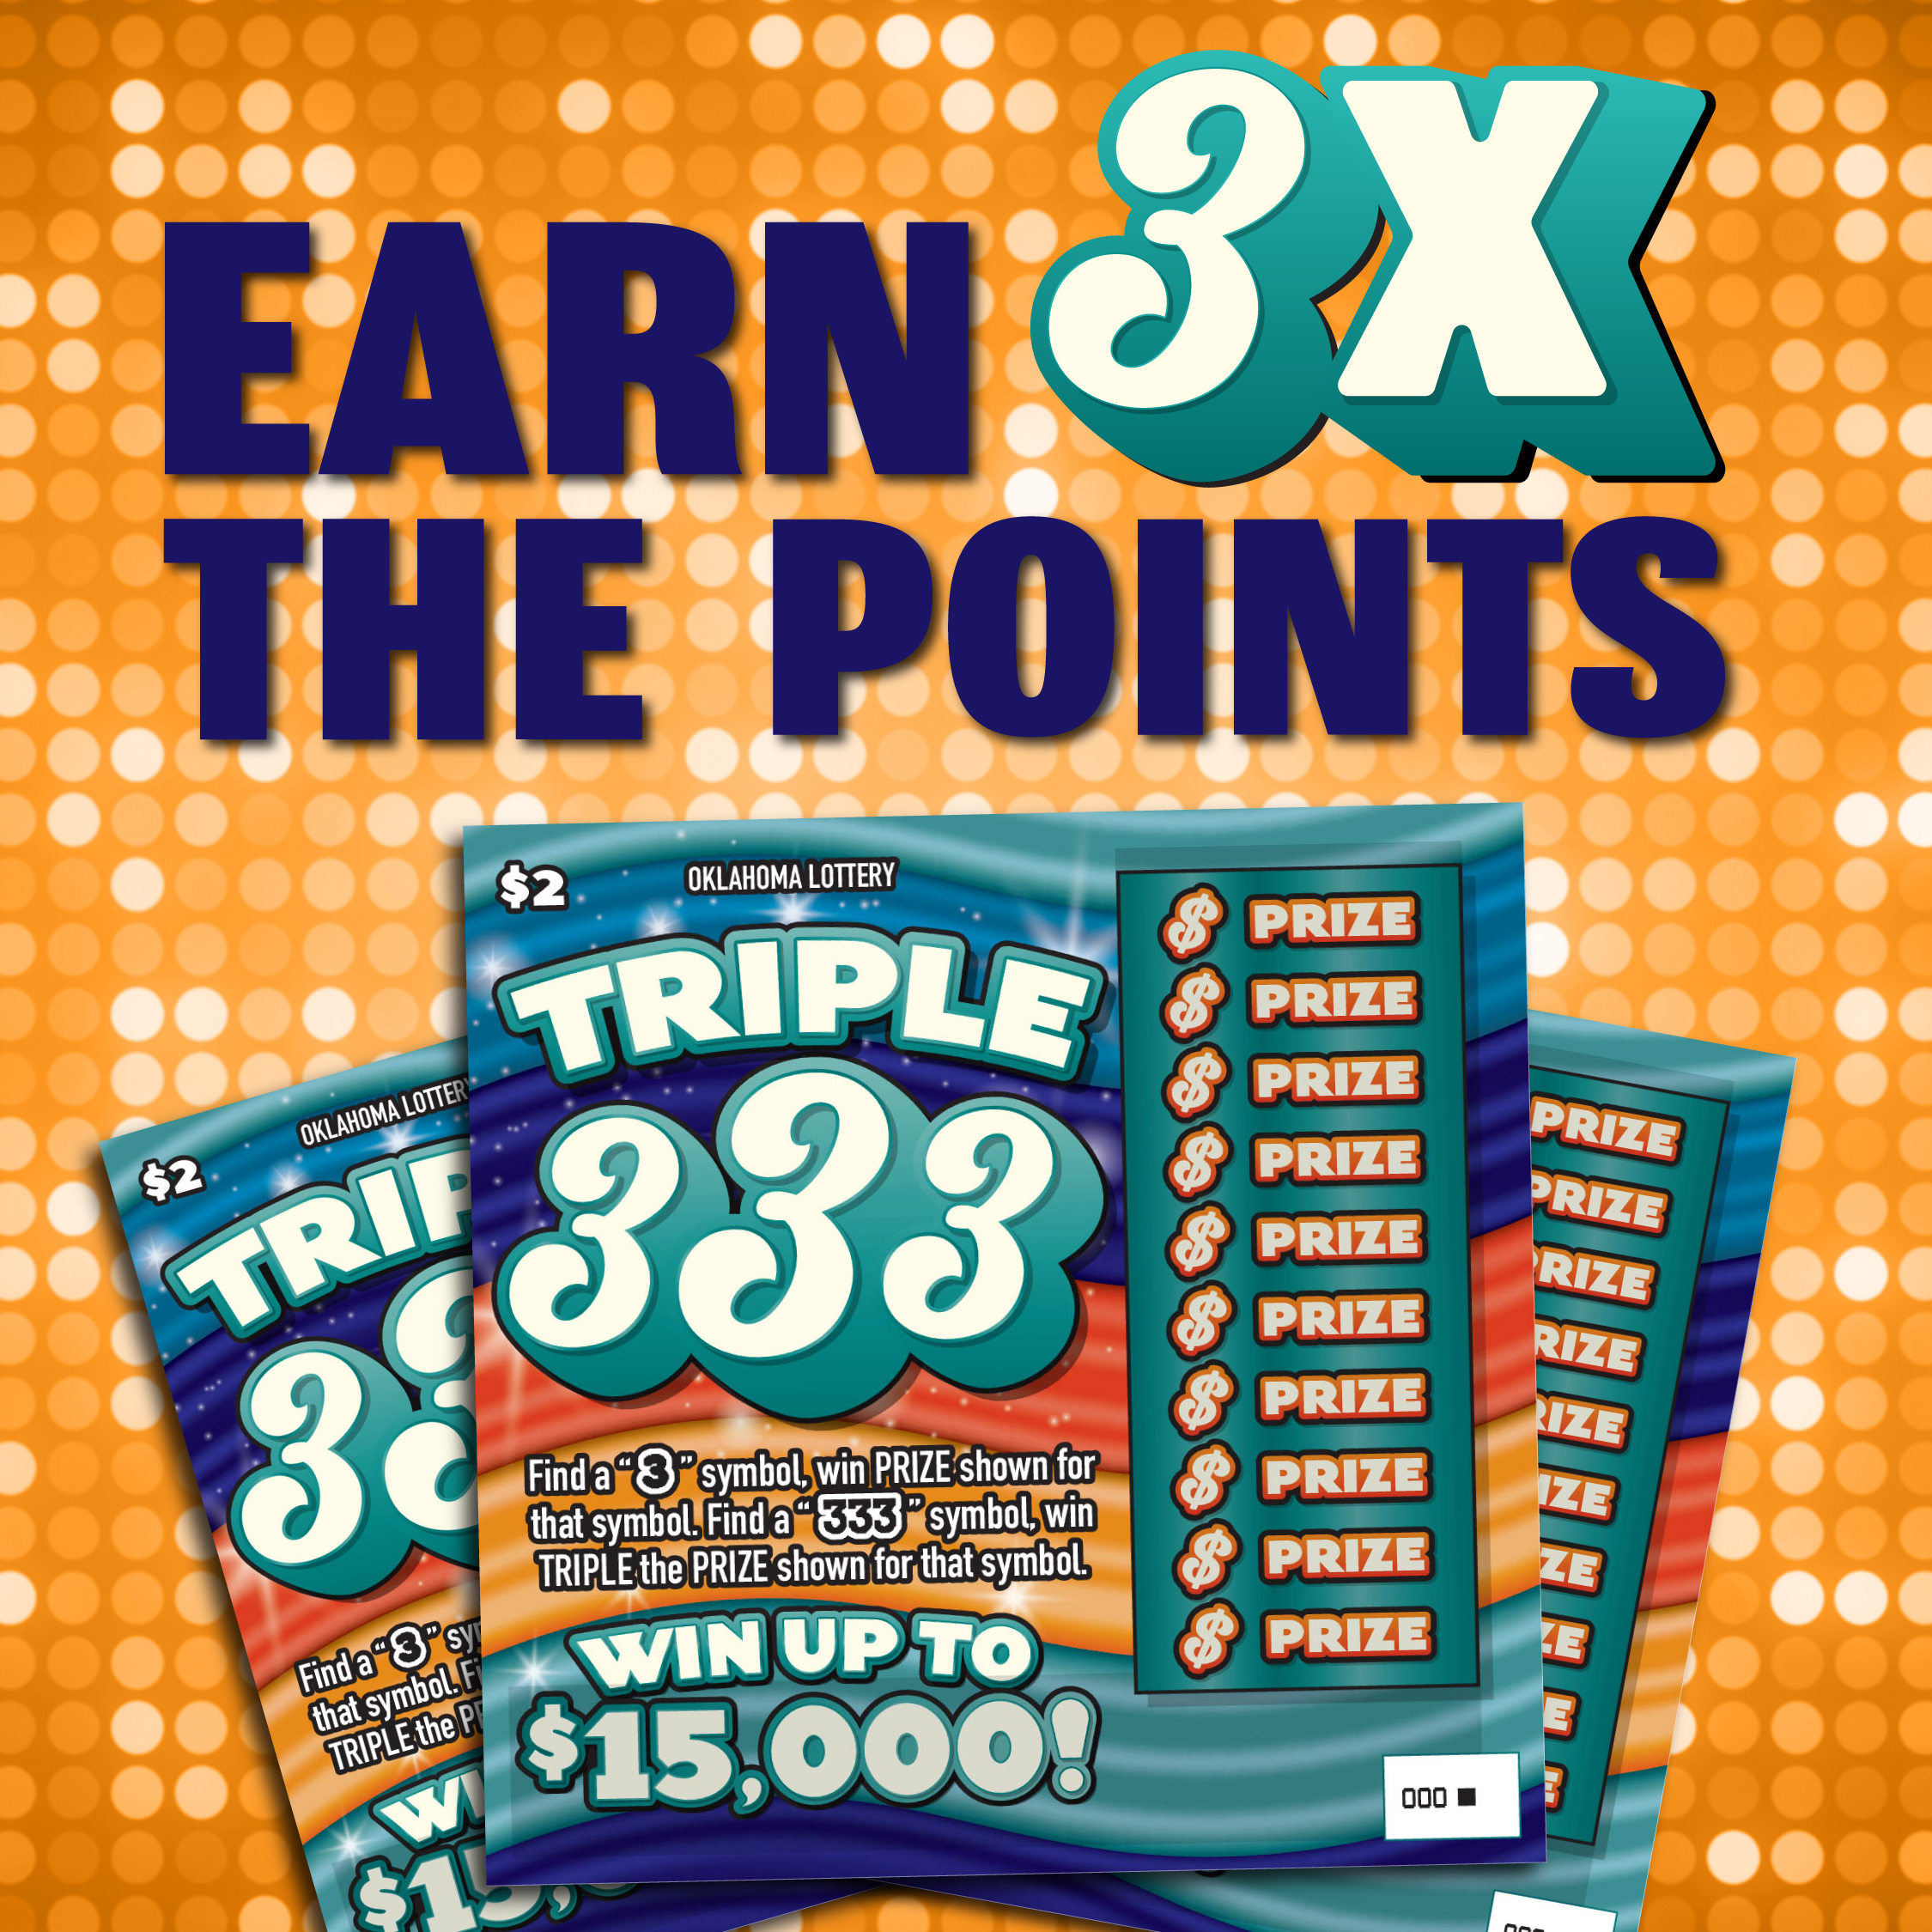 Earn 3X Points Image